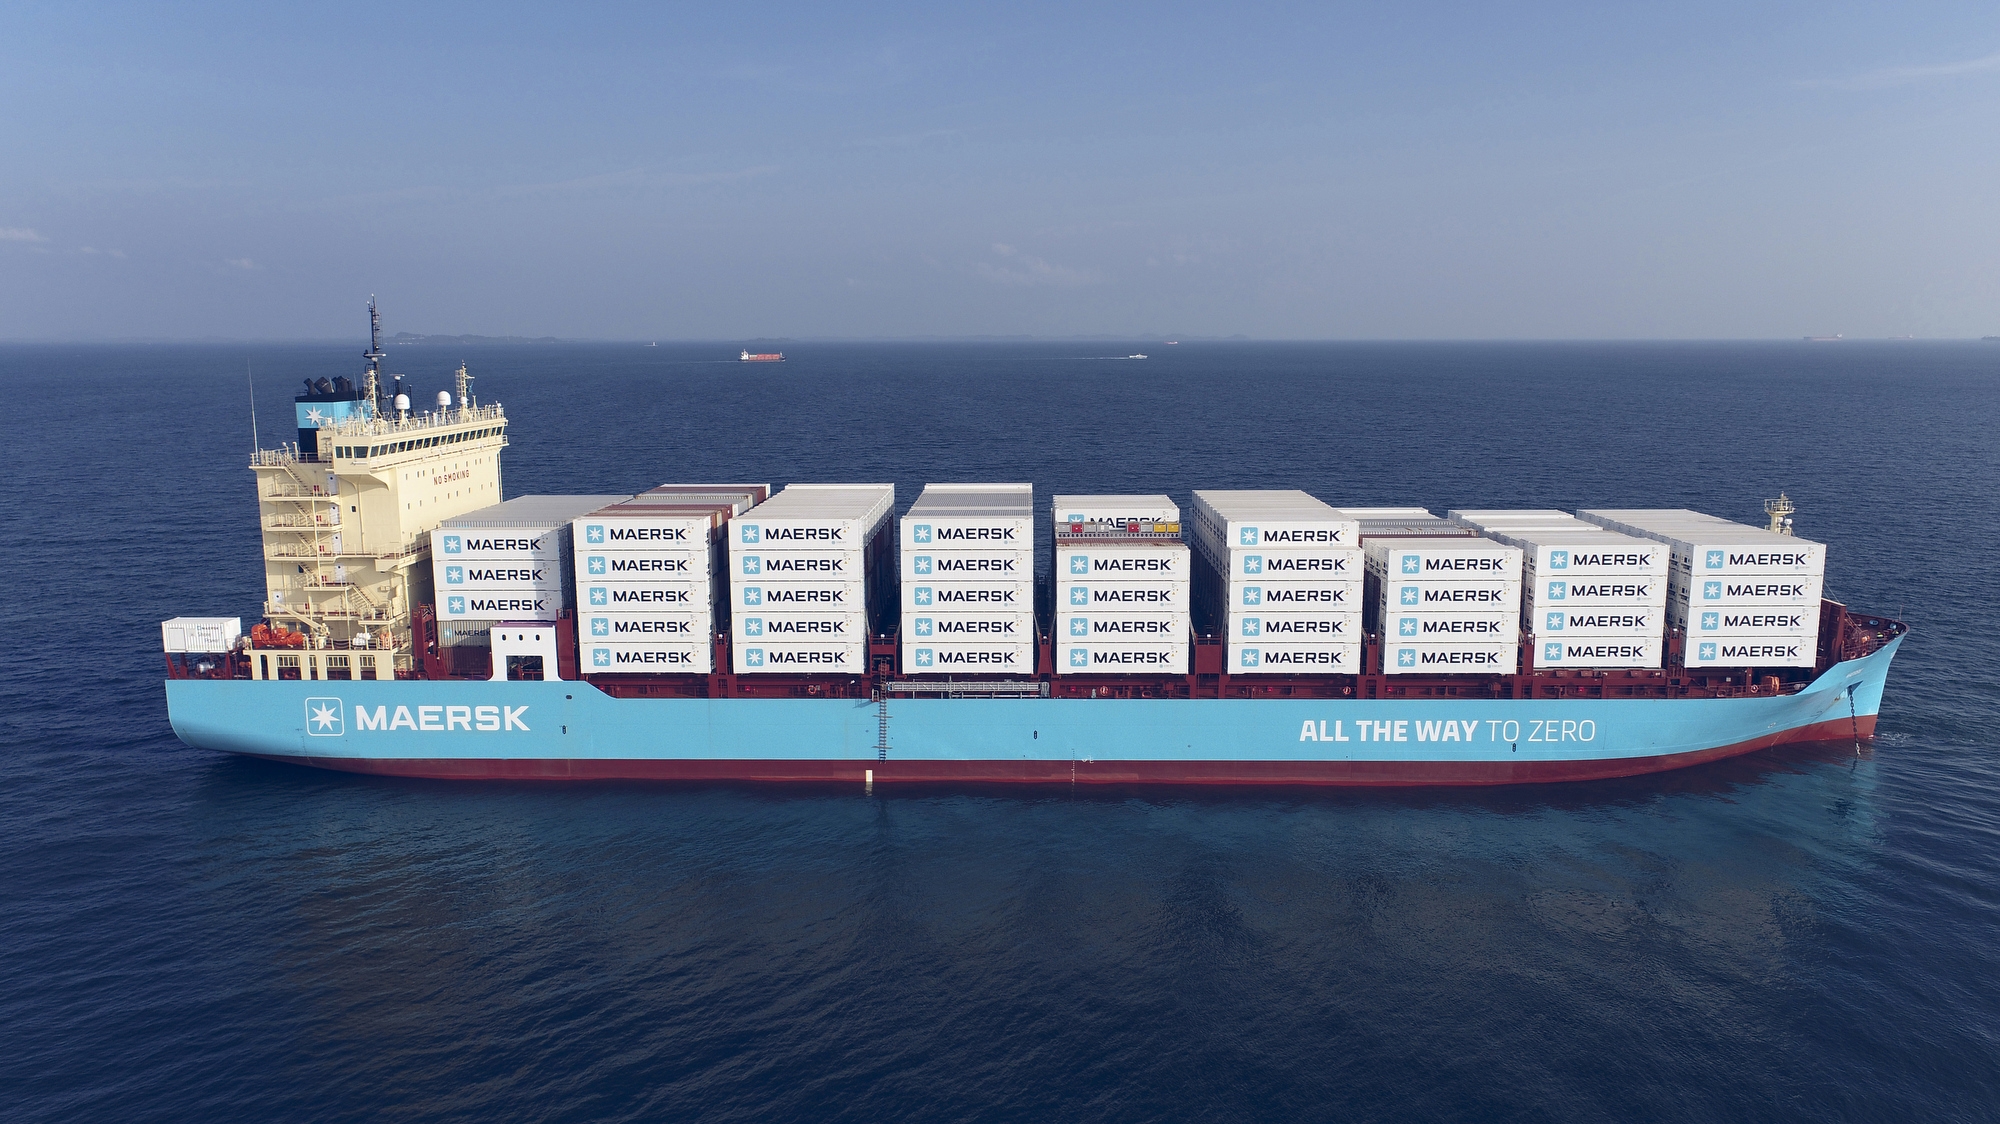 An image of an Amazon Maersk feeder vessel in the water.